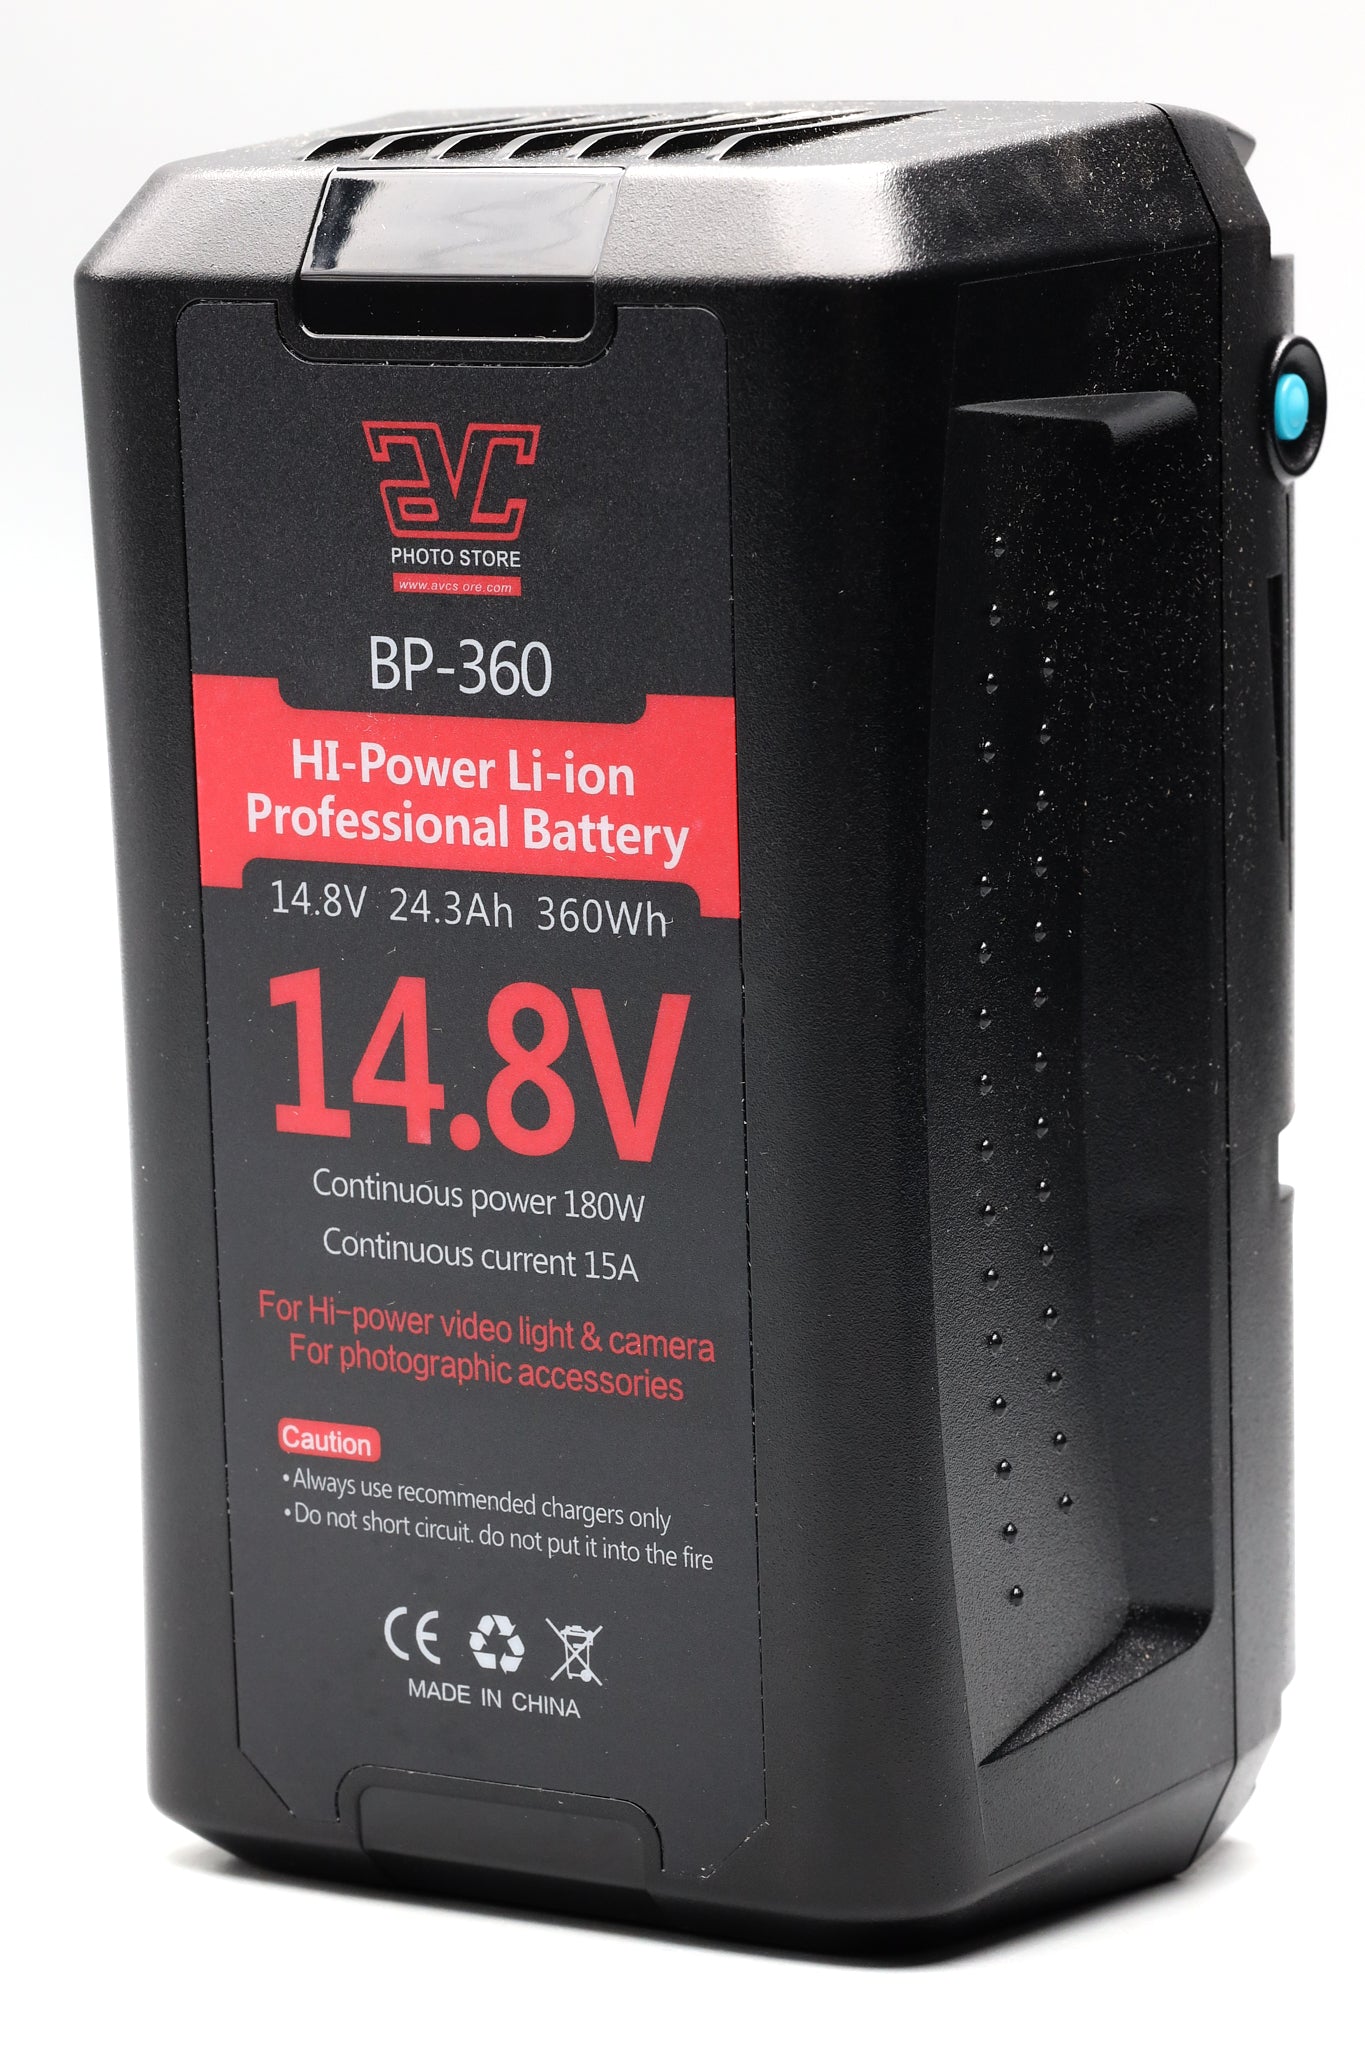 AVC BP360 Lithium Ion Professional Battery, 14.8V 24.3Ah 360Wh.